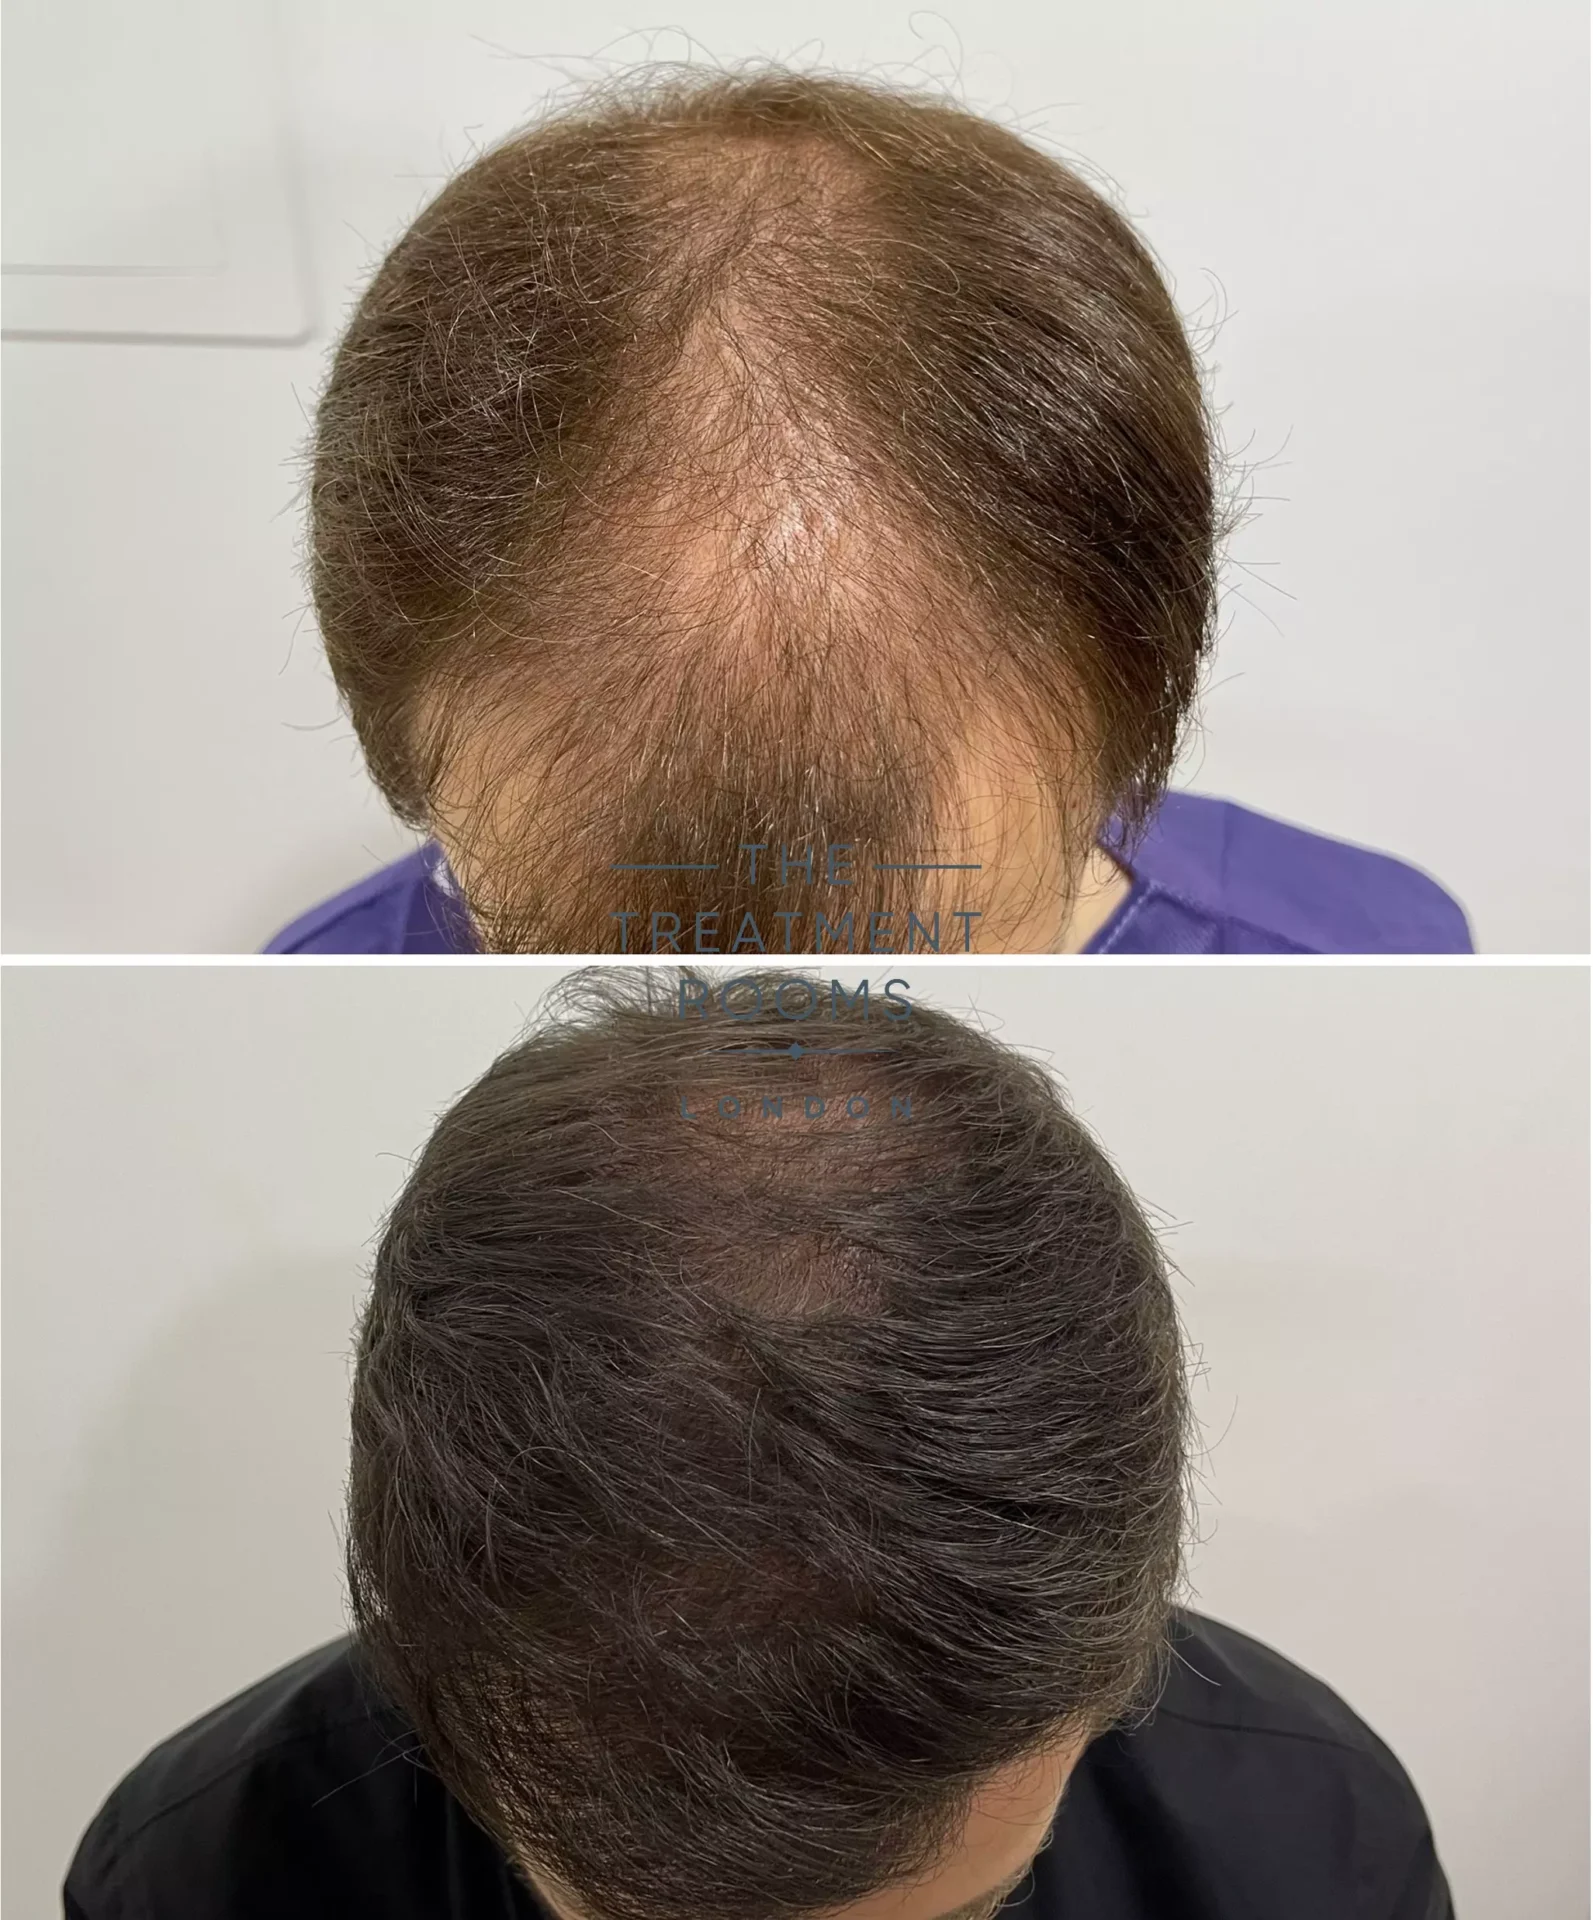 hair transplant UK before and after 1491 grafts